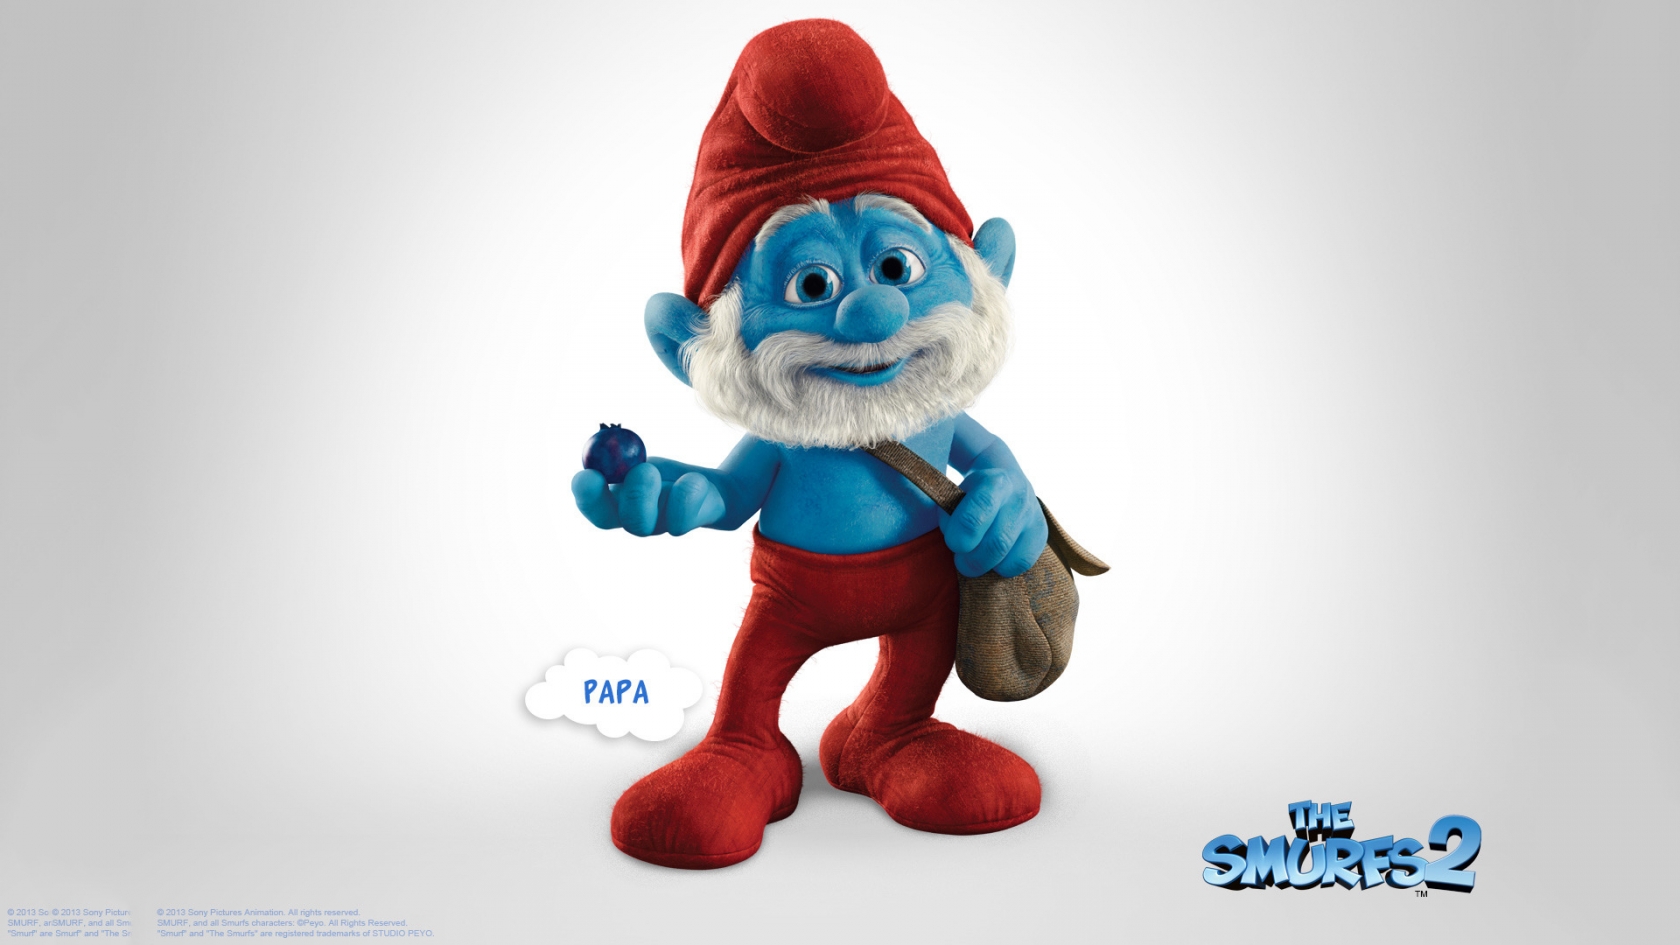 Papa The Smurfs 2 for 1680 x 945 HDTV resolution